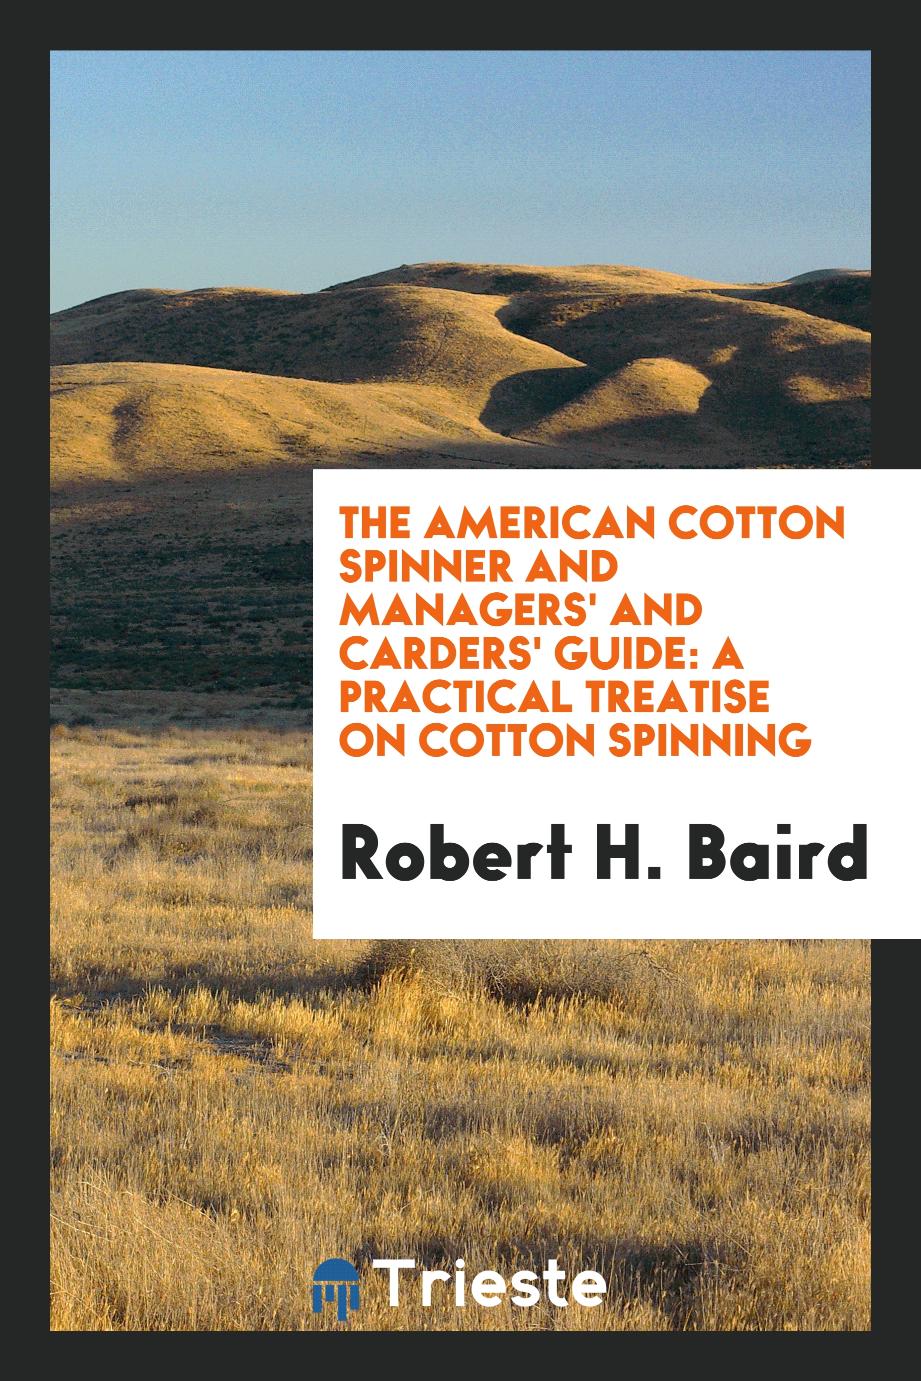 The American cotton spinner and managers' and carders' guide: a practical treatise on cotton spinning